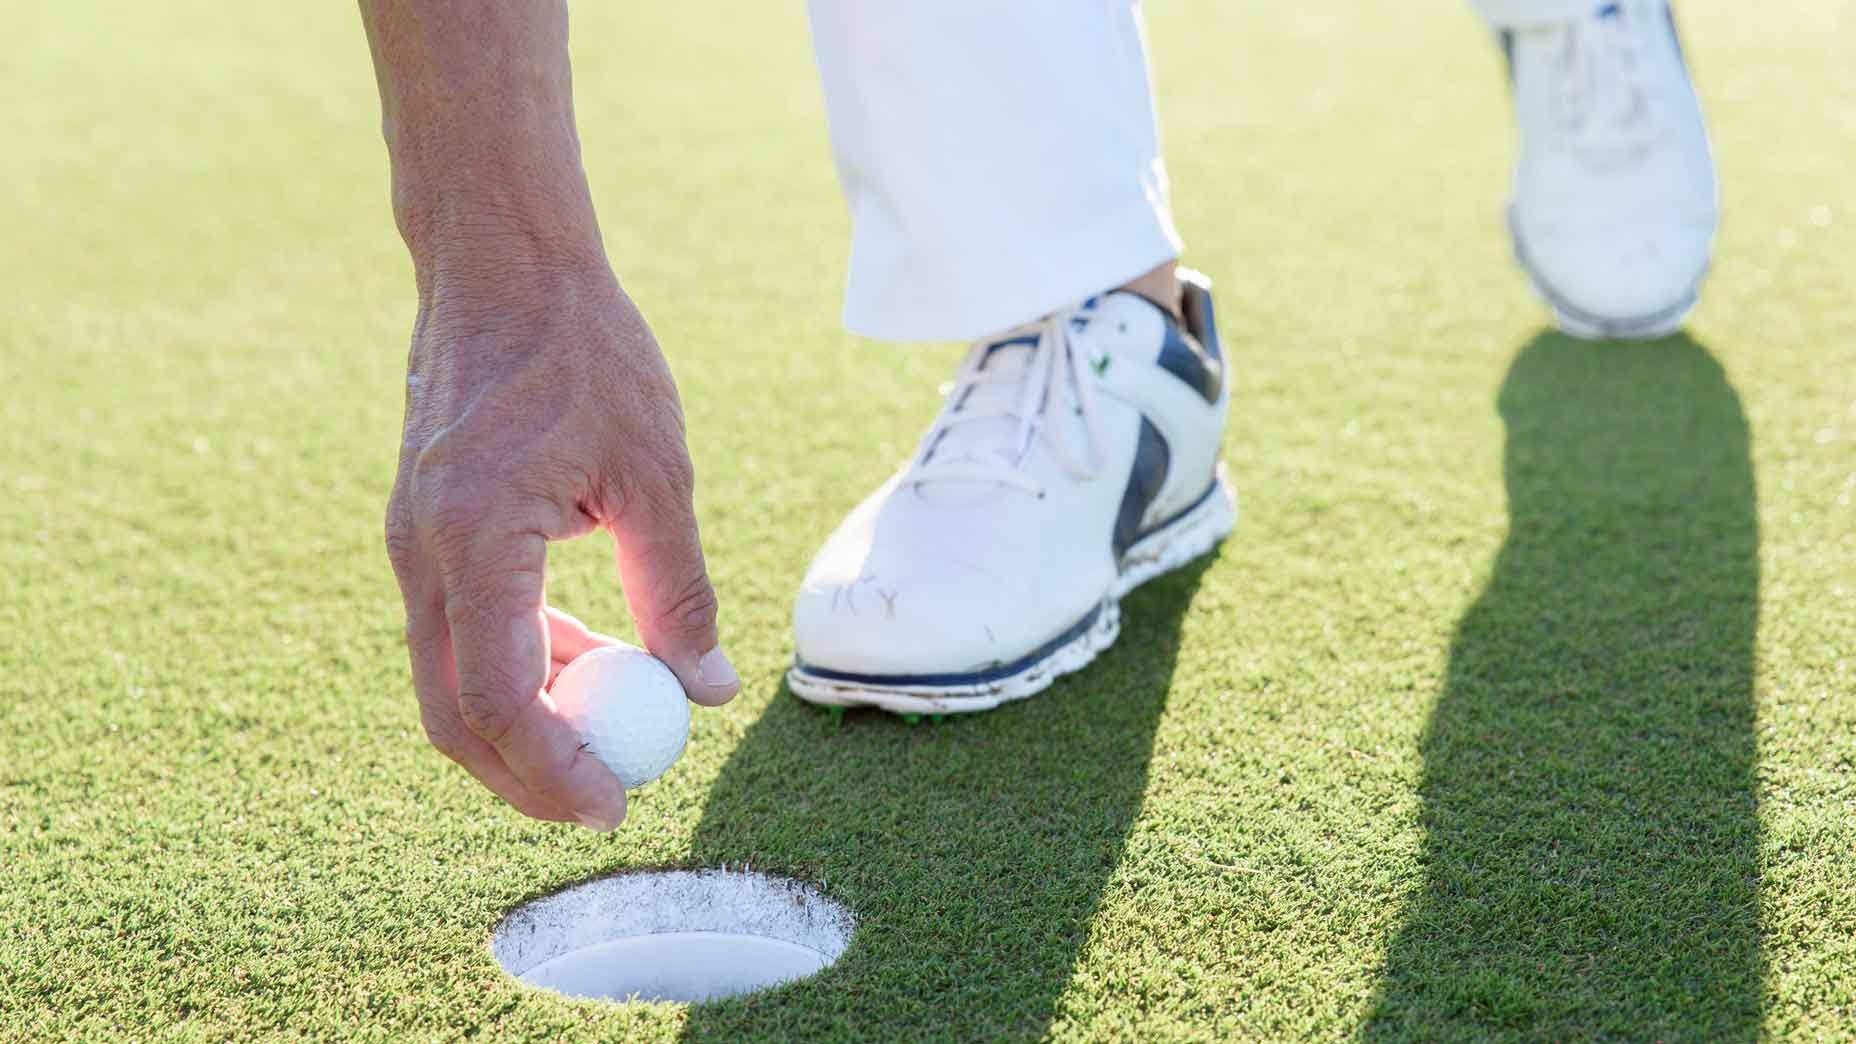 What are the basic steps to select a golf ball?